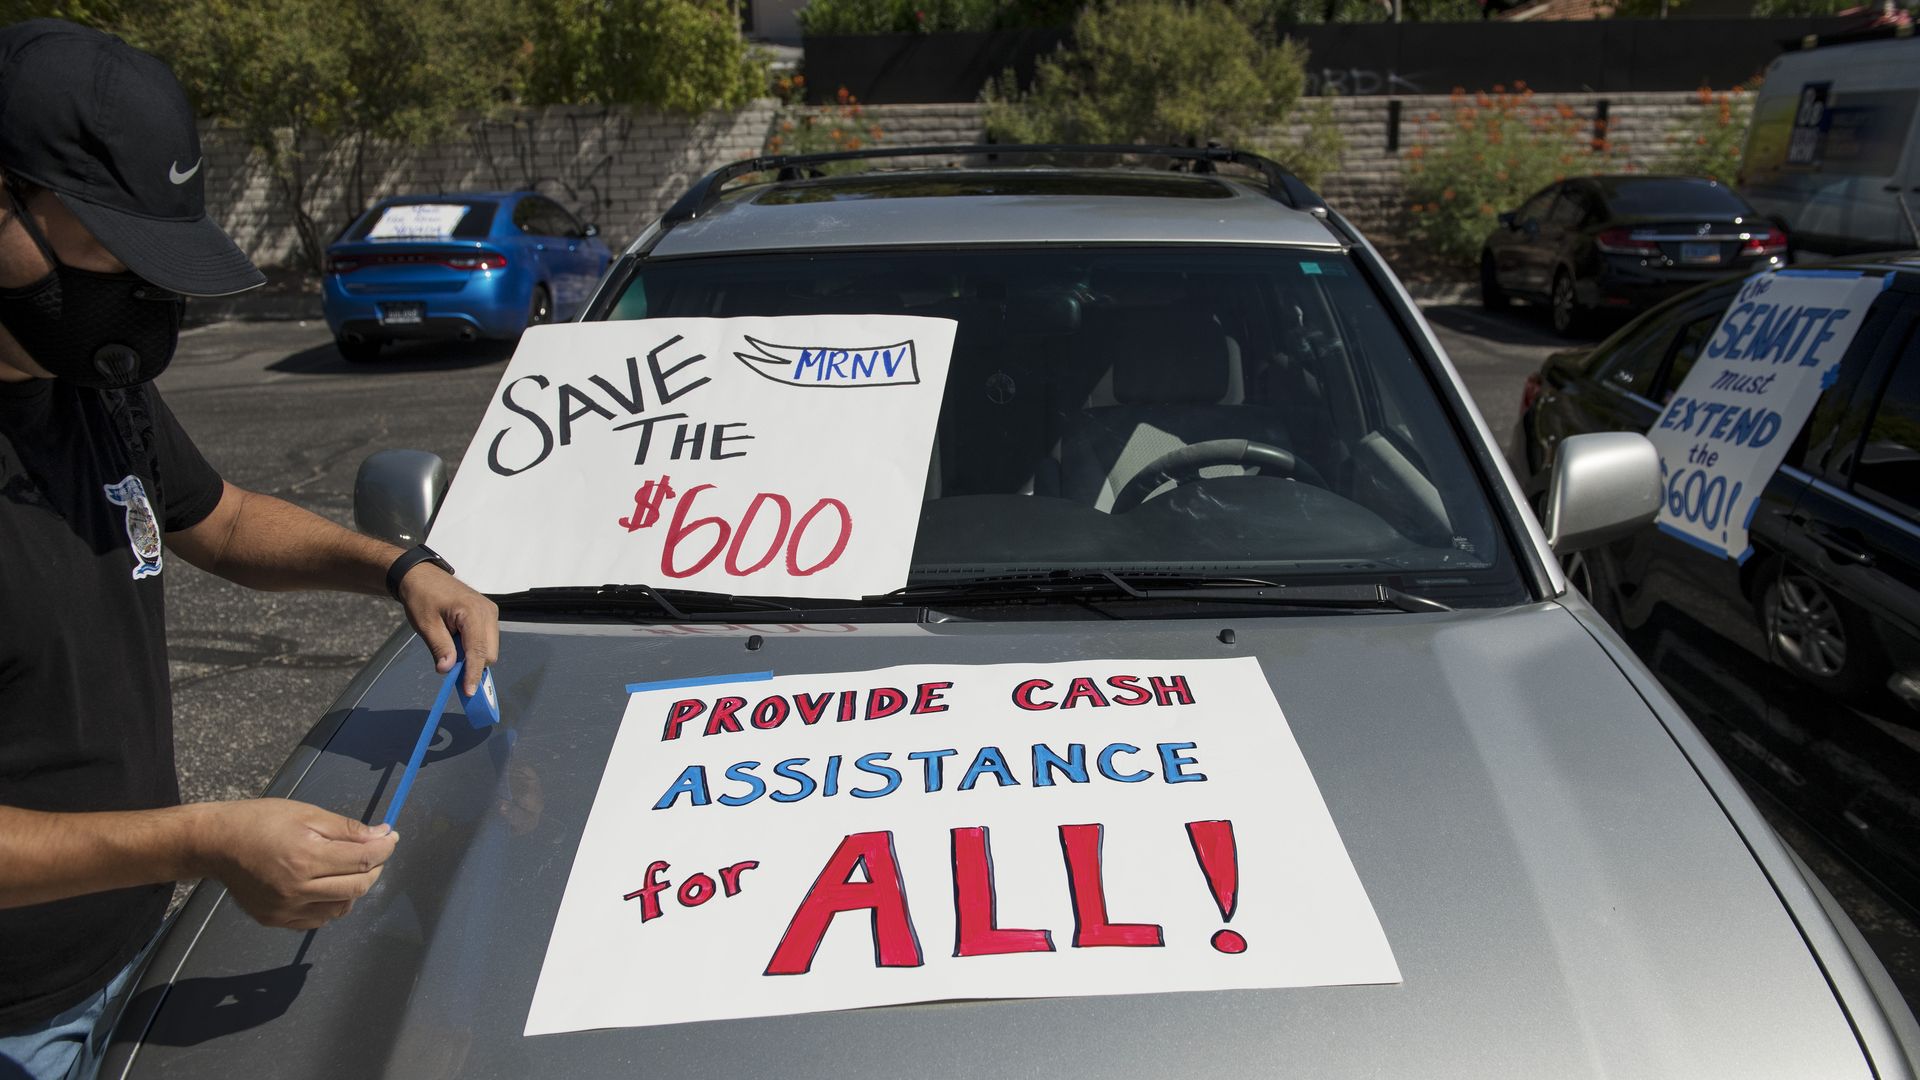 A man tapes signs to his car before participating in a caravan rally down the Las Vegas Strip in support of extending the $600 unemployment benefit, August 6, 2020 in Las Vegas, Nevada